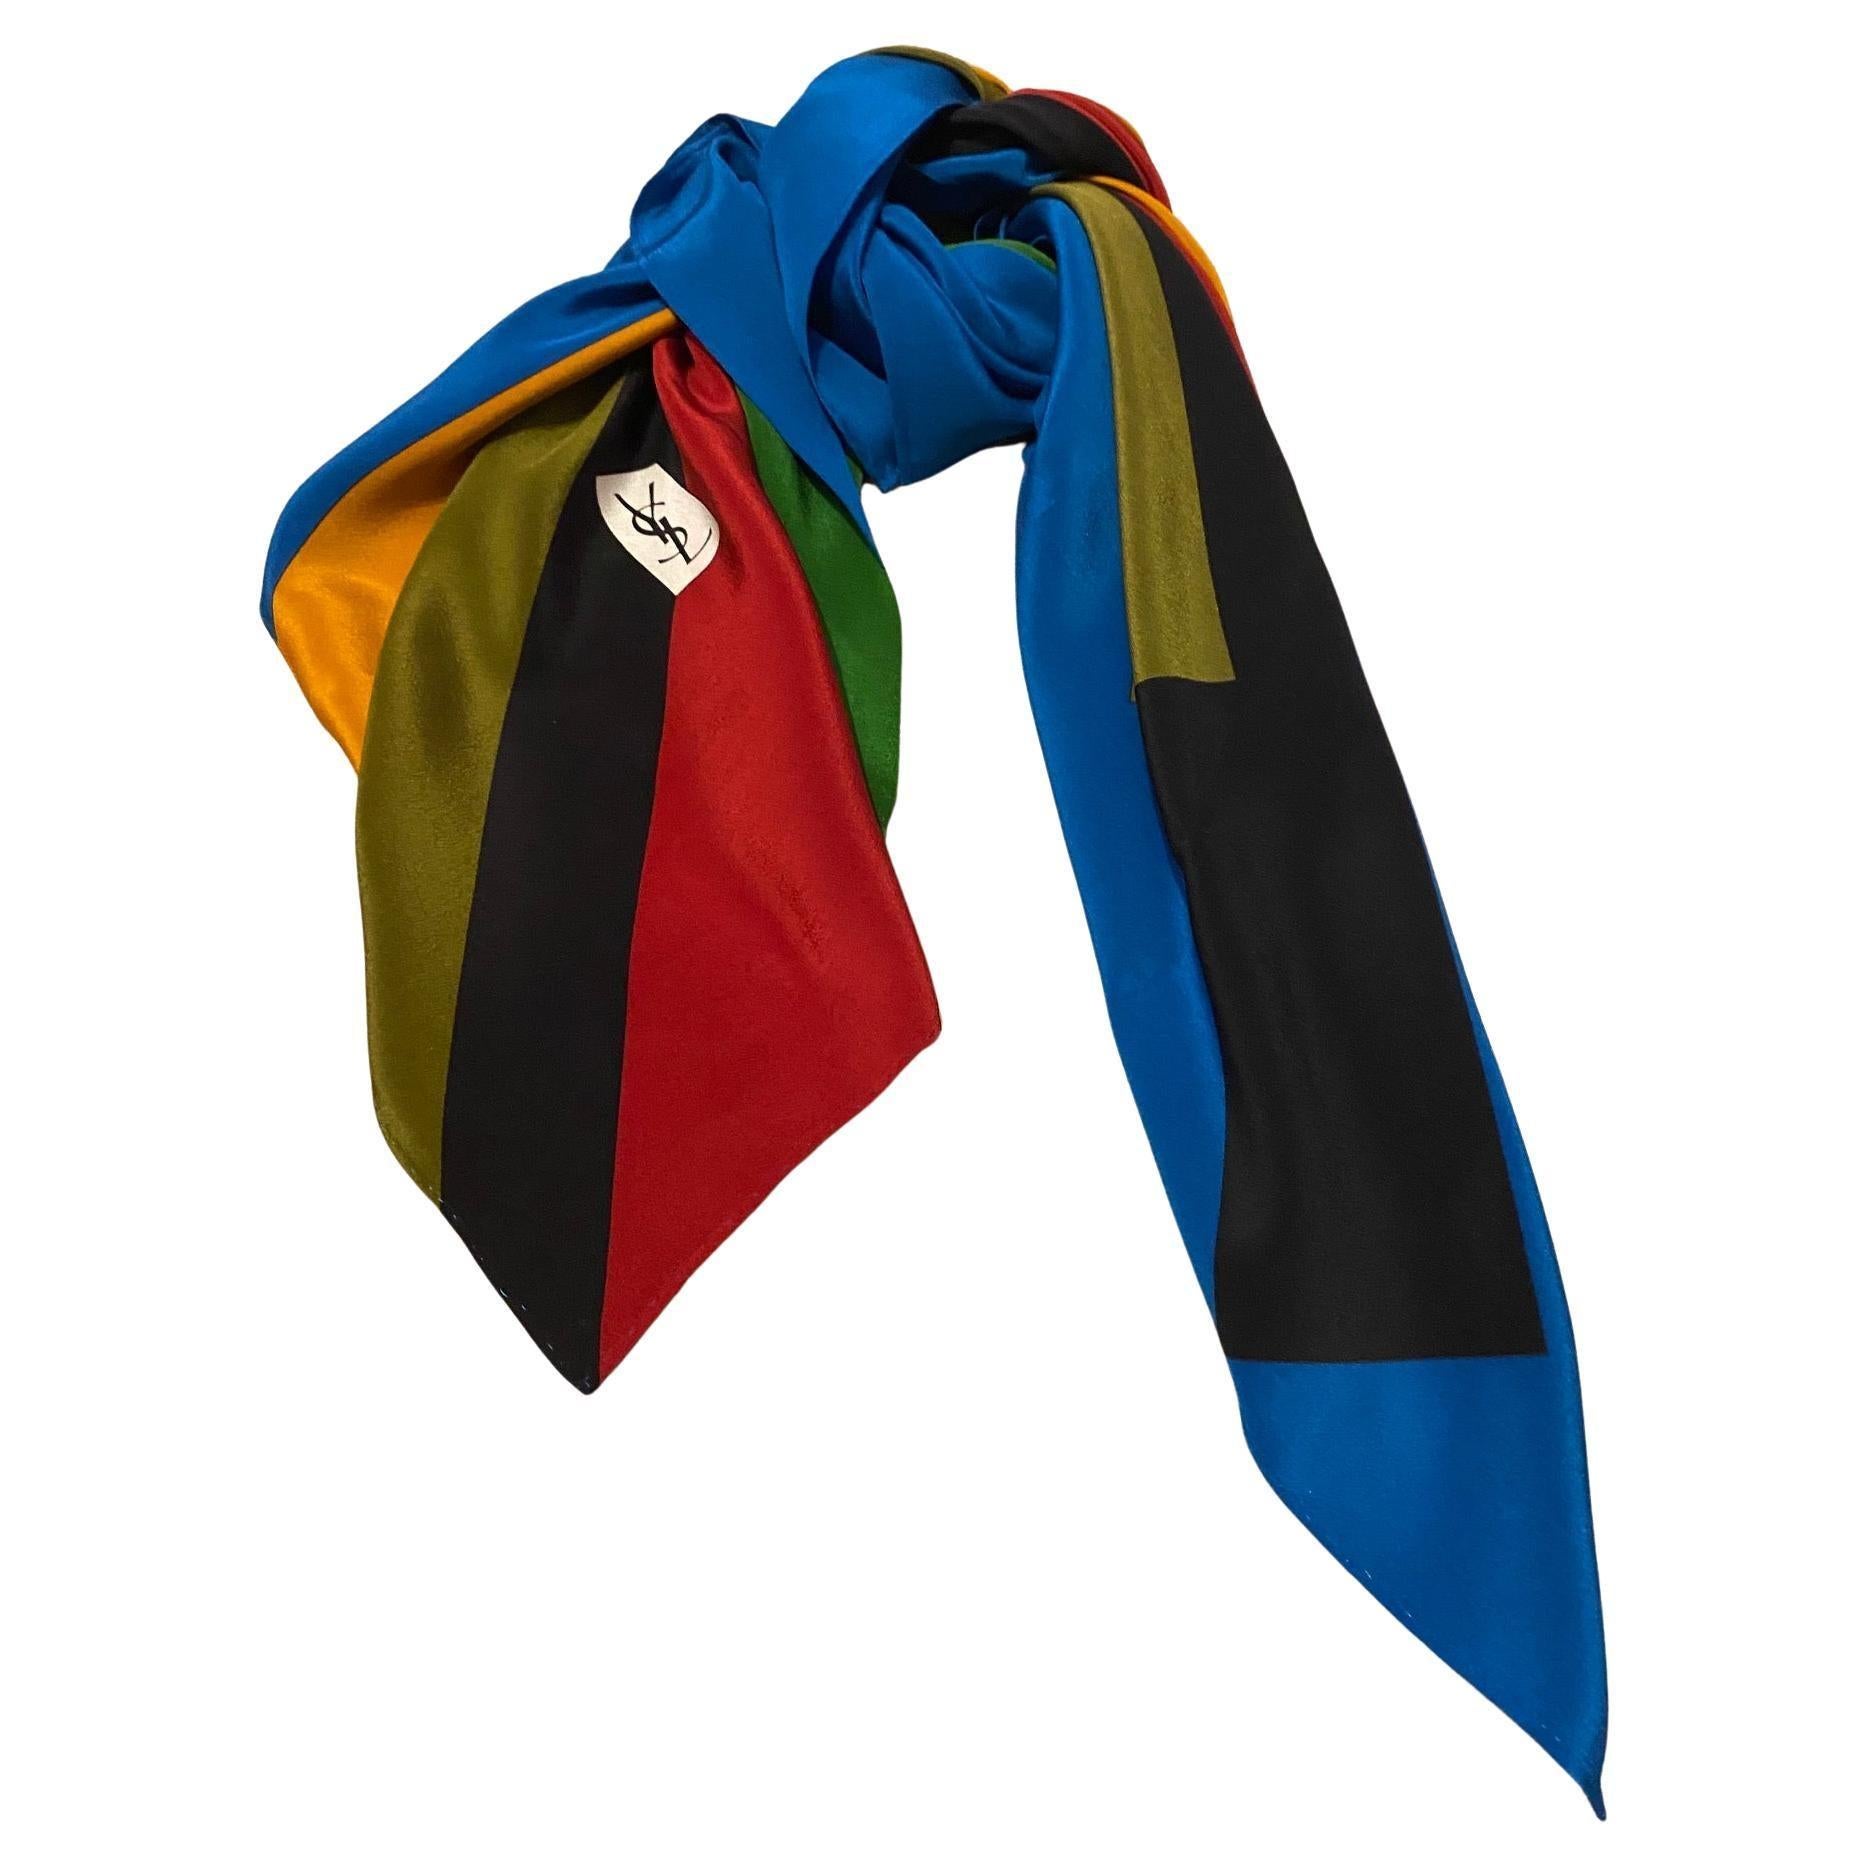 1980s Yves Saint Laurent Geometric Abstract Print Silk Scarf  In Good Condition For Sale In London, GB